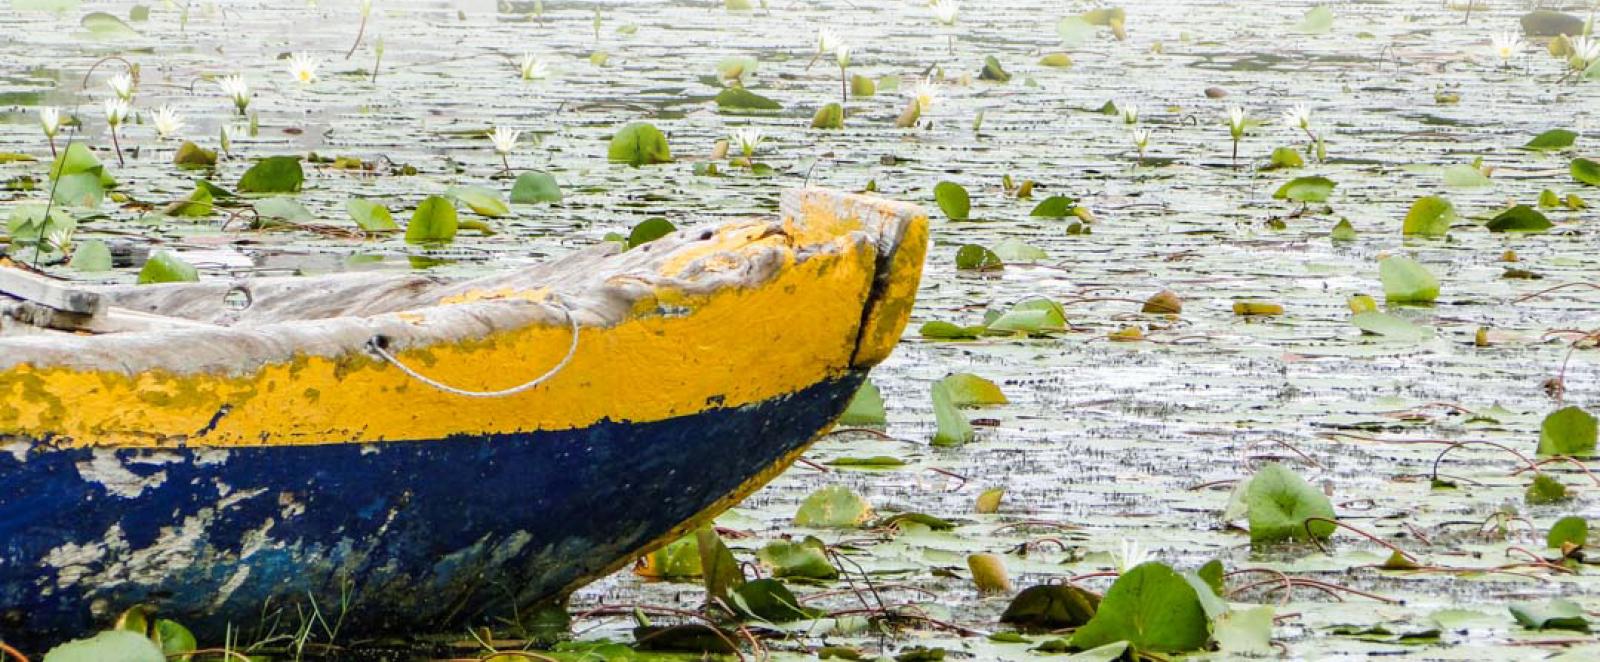 a boat on a lake with many green leaves and plants around it